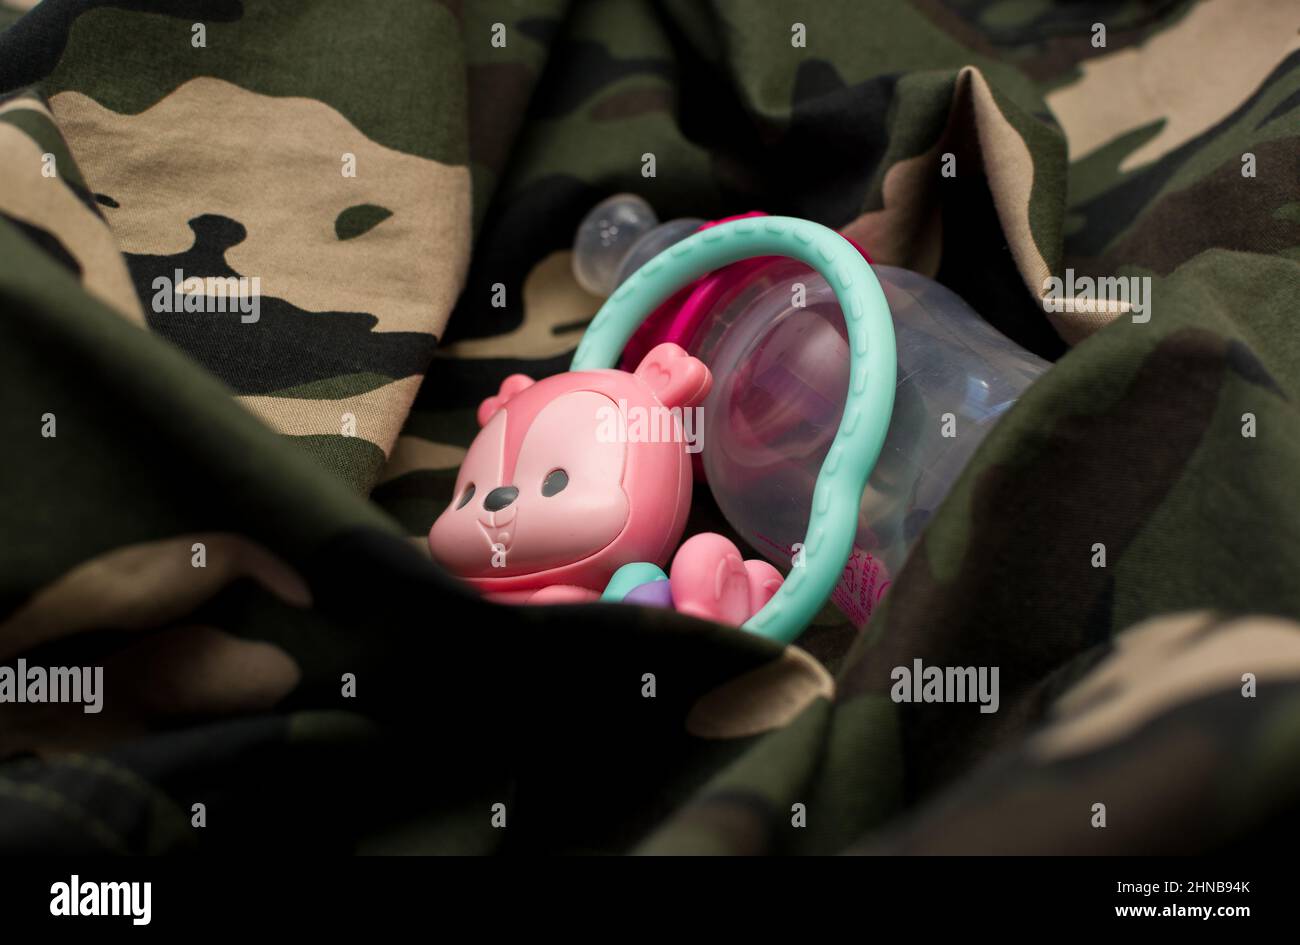 Rattle toy and baby bottle on military uniform, close up. Love and war concept Stock Photo